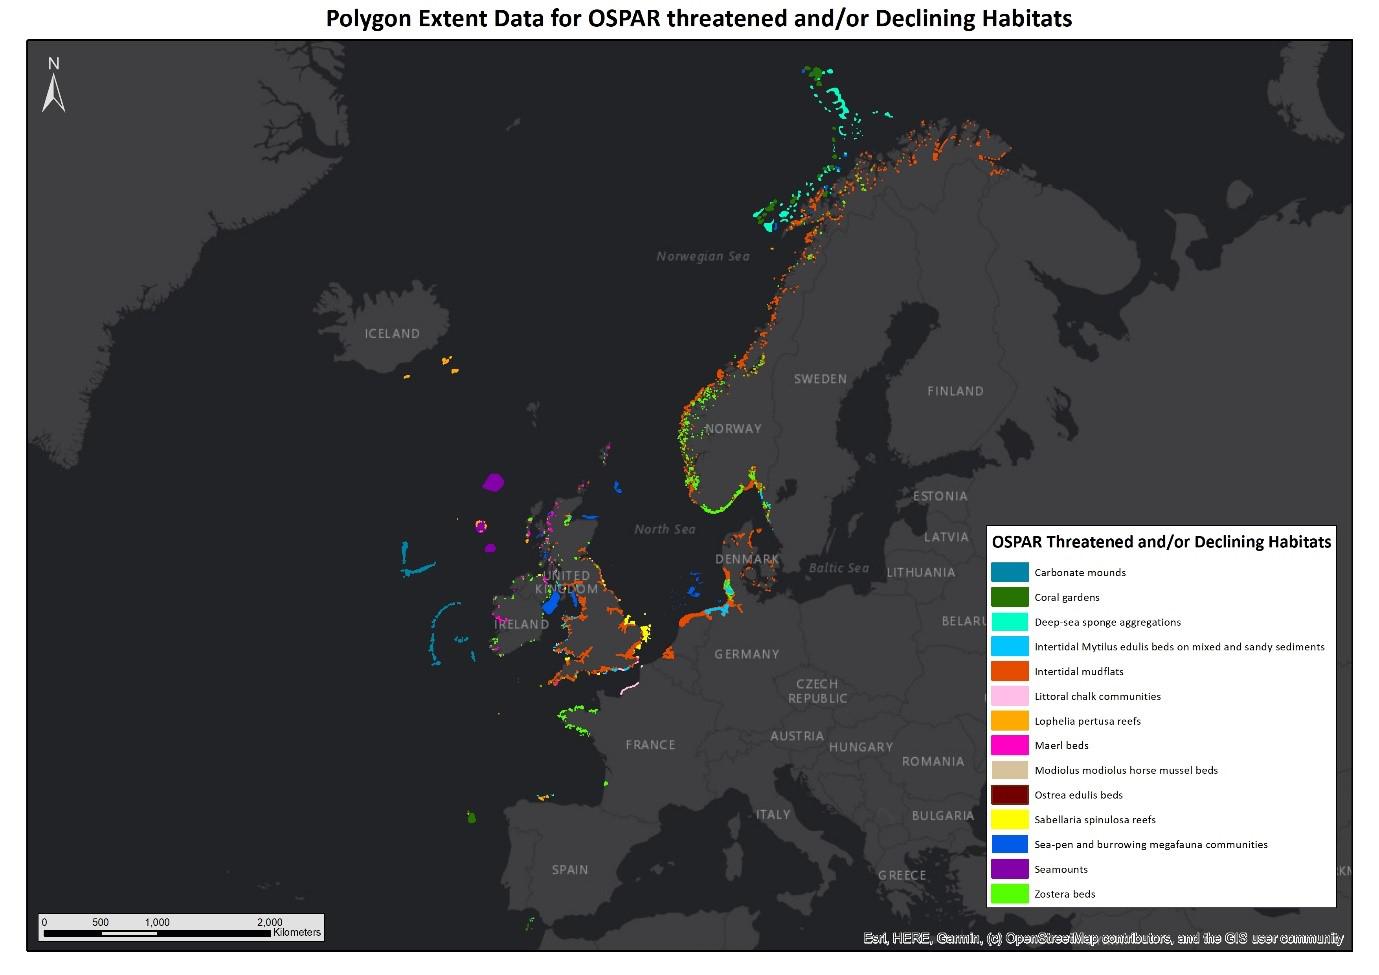 Areal extent data for OSPAR Threatened and/or Declining Habitats. ©EMODnet